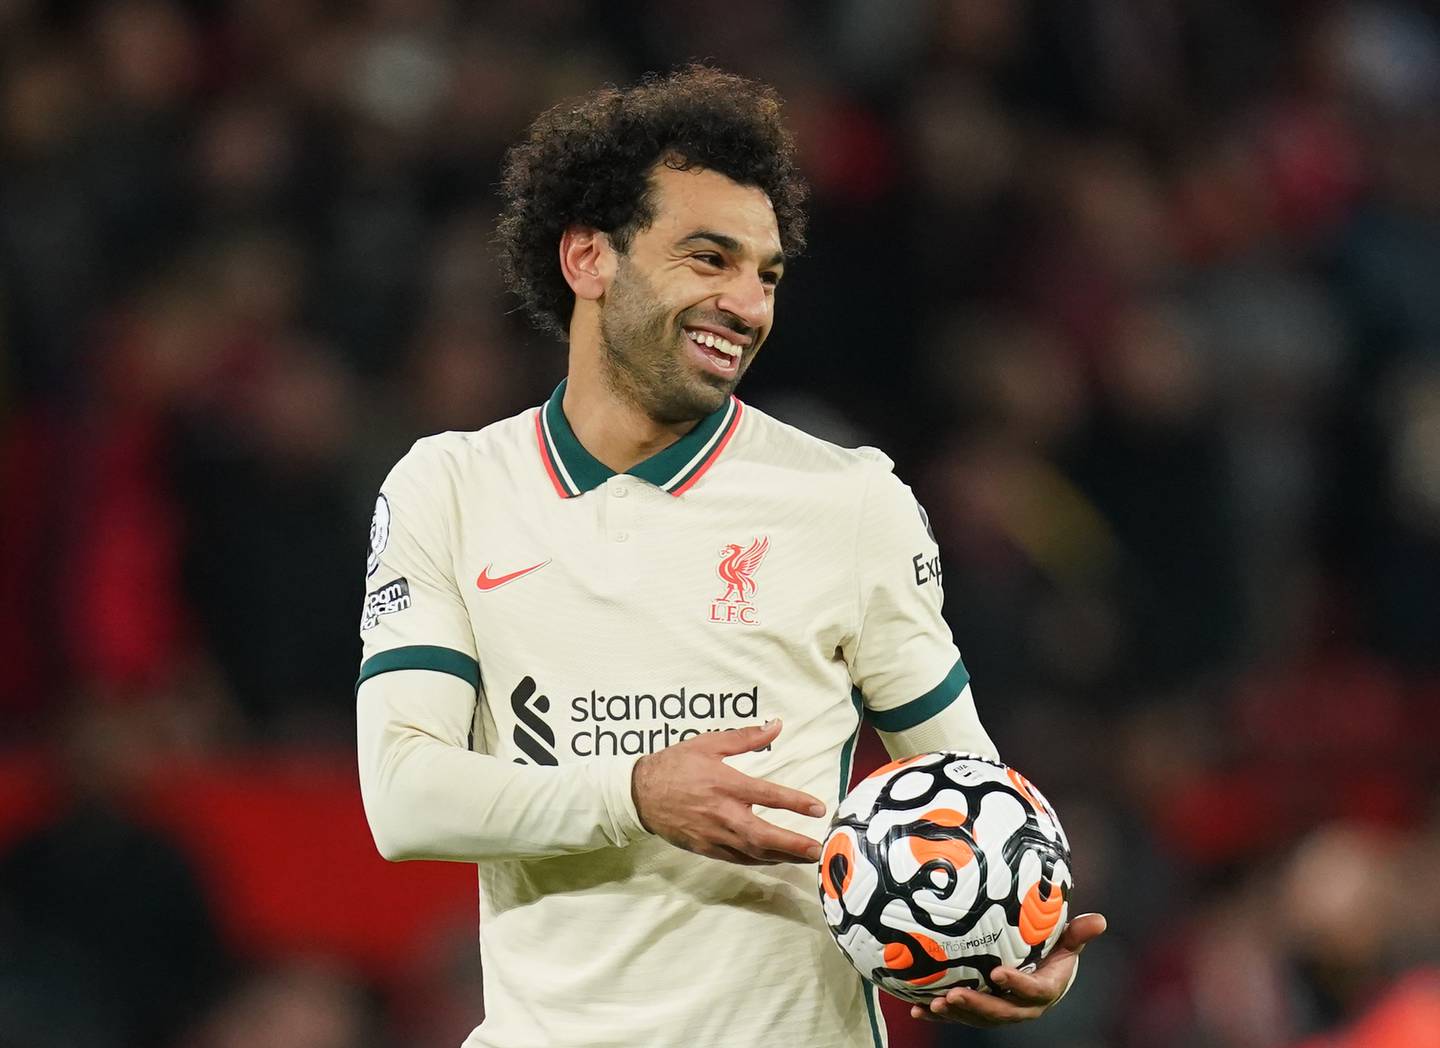 Liverpool hat-trick scorer Mohamed Salah celebrates with the match ball at Old Trafford. PA